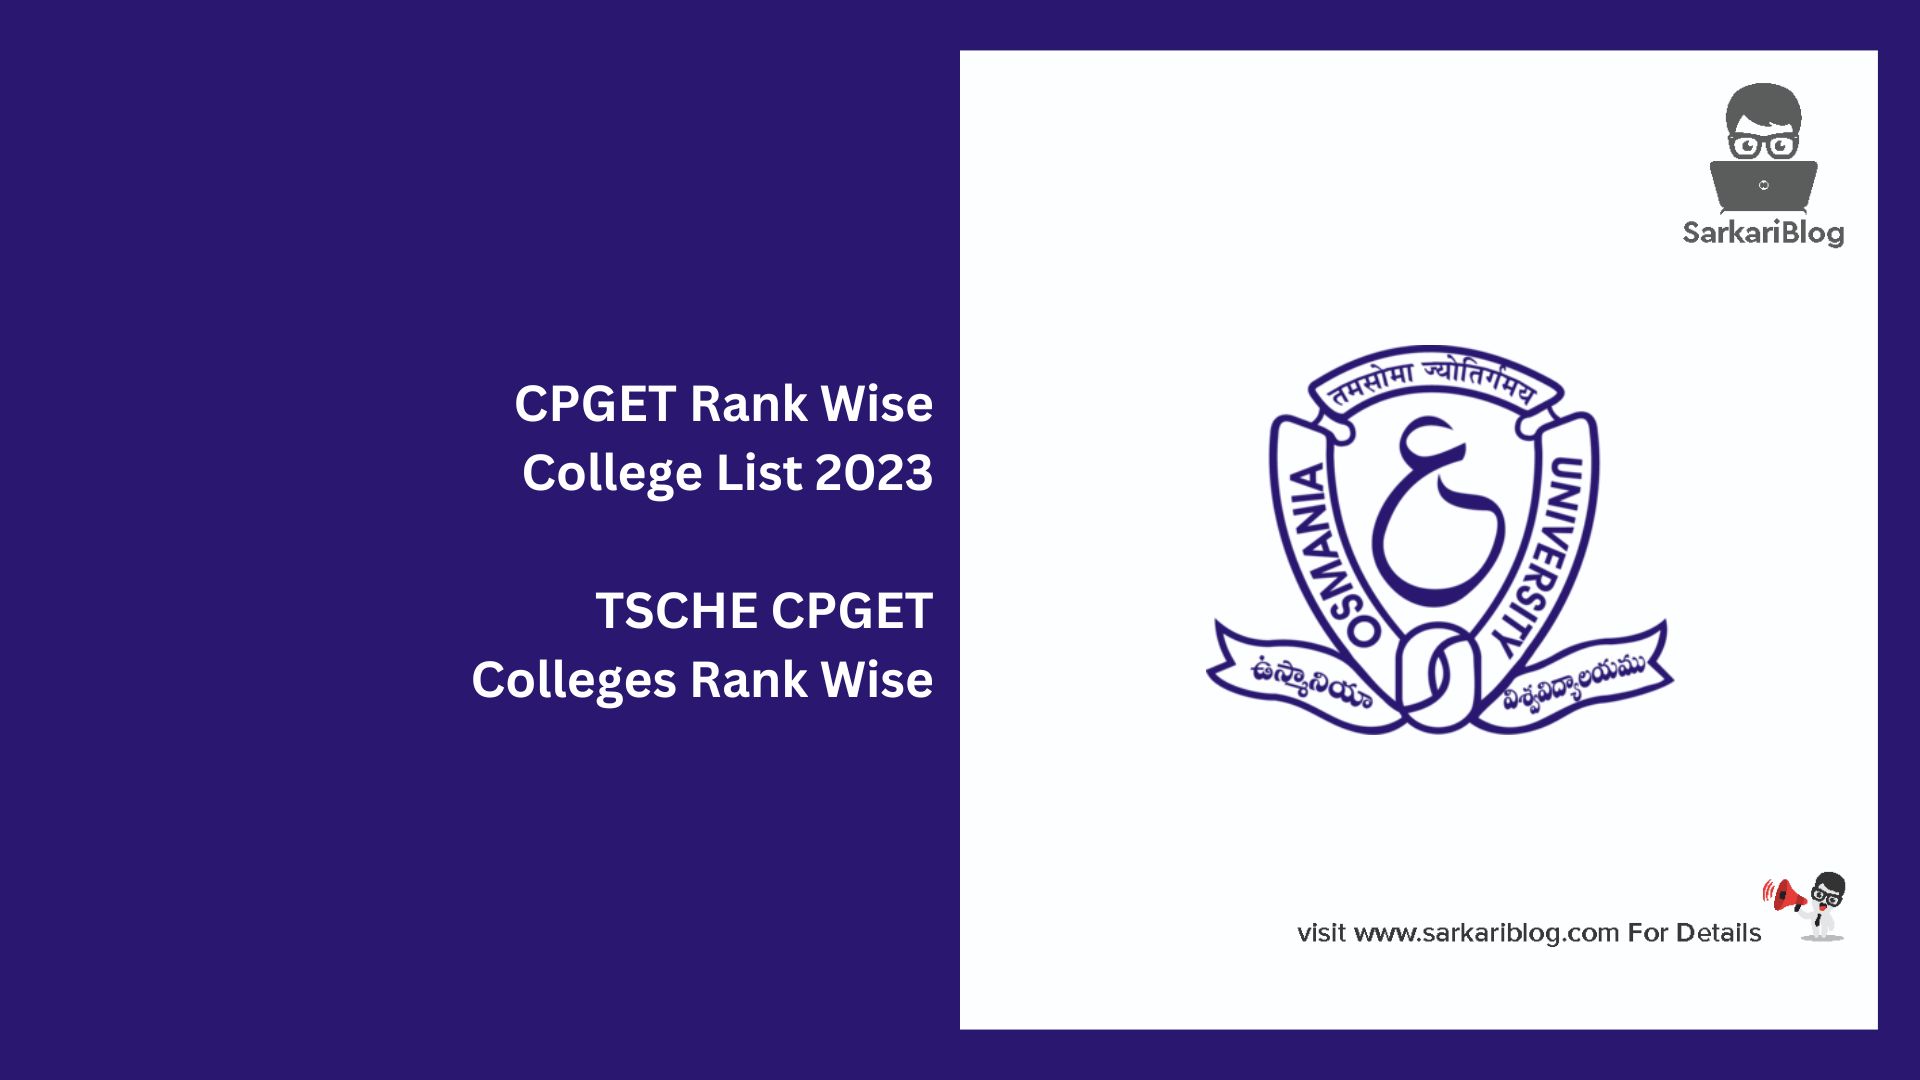 CPGET Rank Wise College List 2023